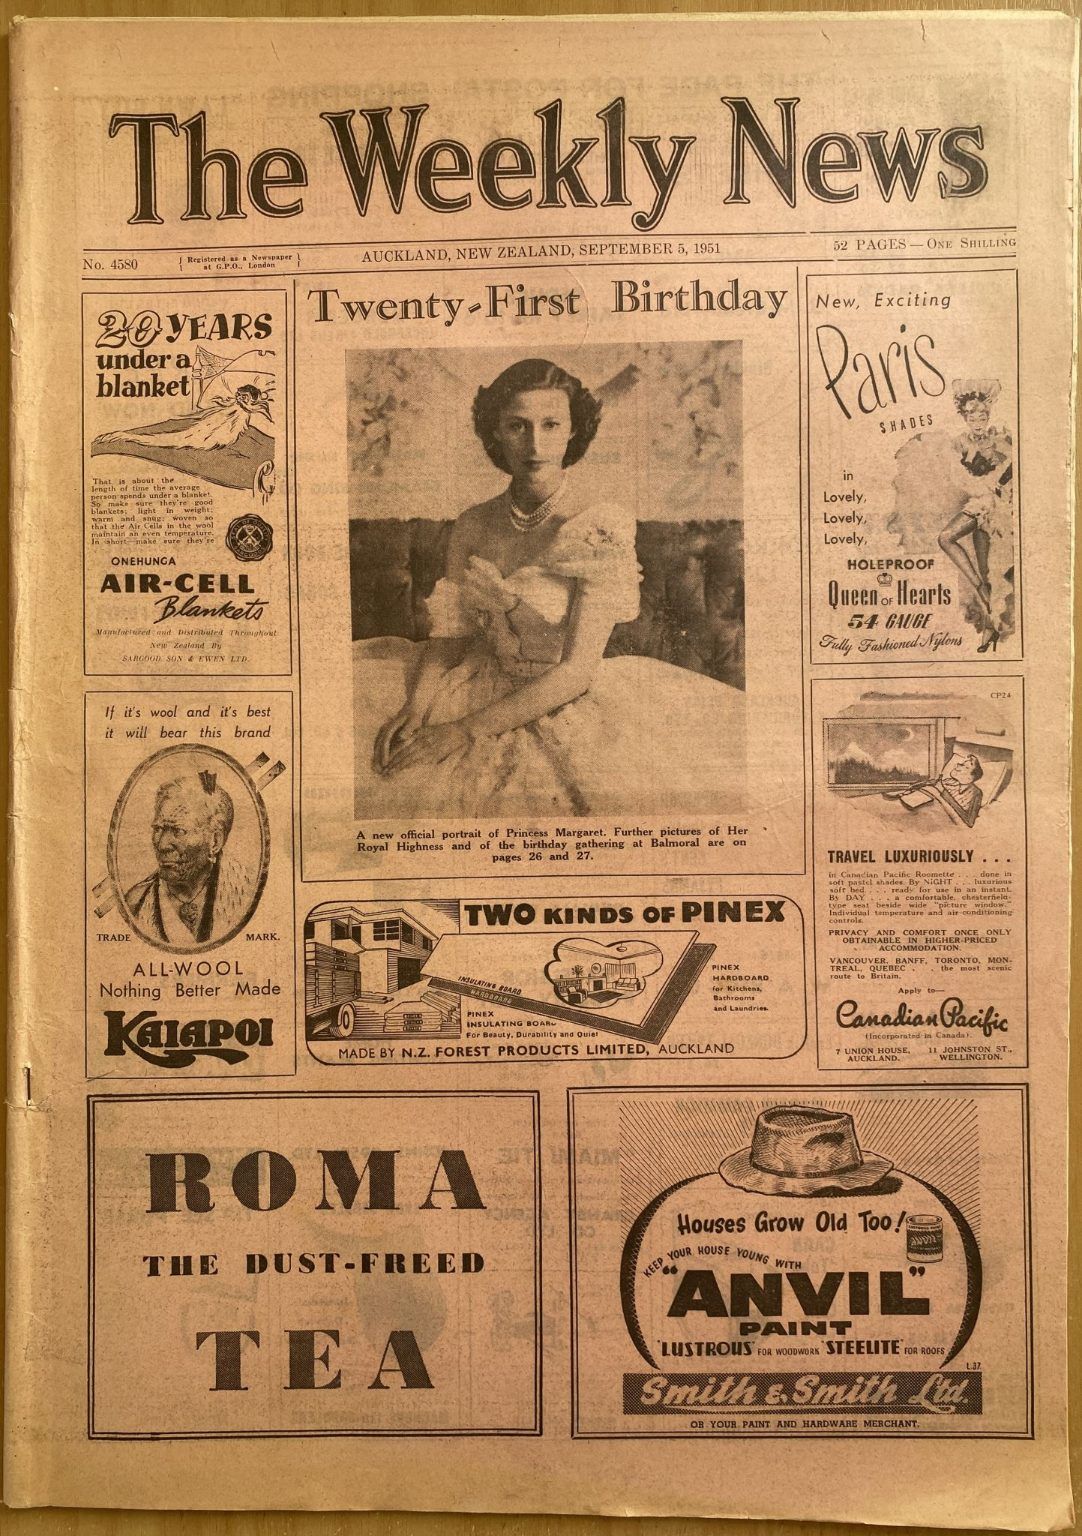 OLD NEWSPAPER: The Weekly News, No. 4580, 5 September 1951